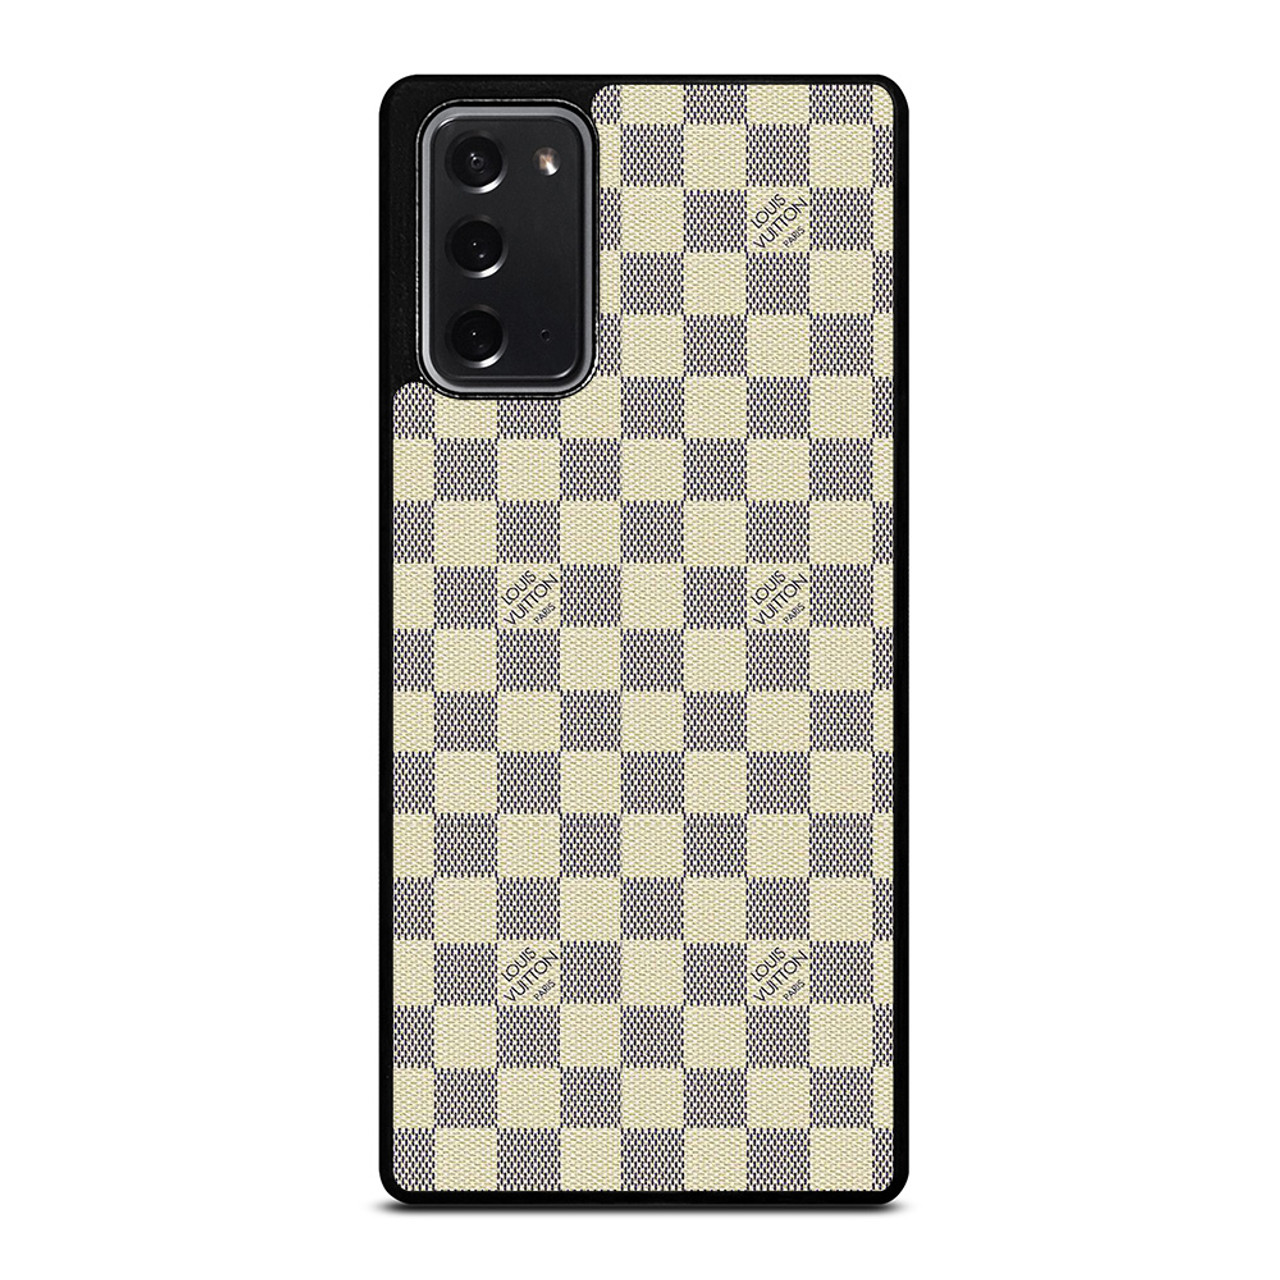 LOUIS VUITTON LV MELTING LOGO PATTERN Samsung Galaxy Note 20 Case Cover